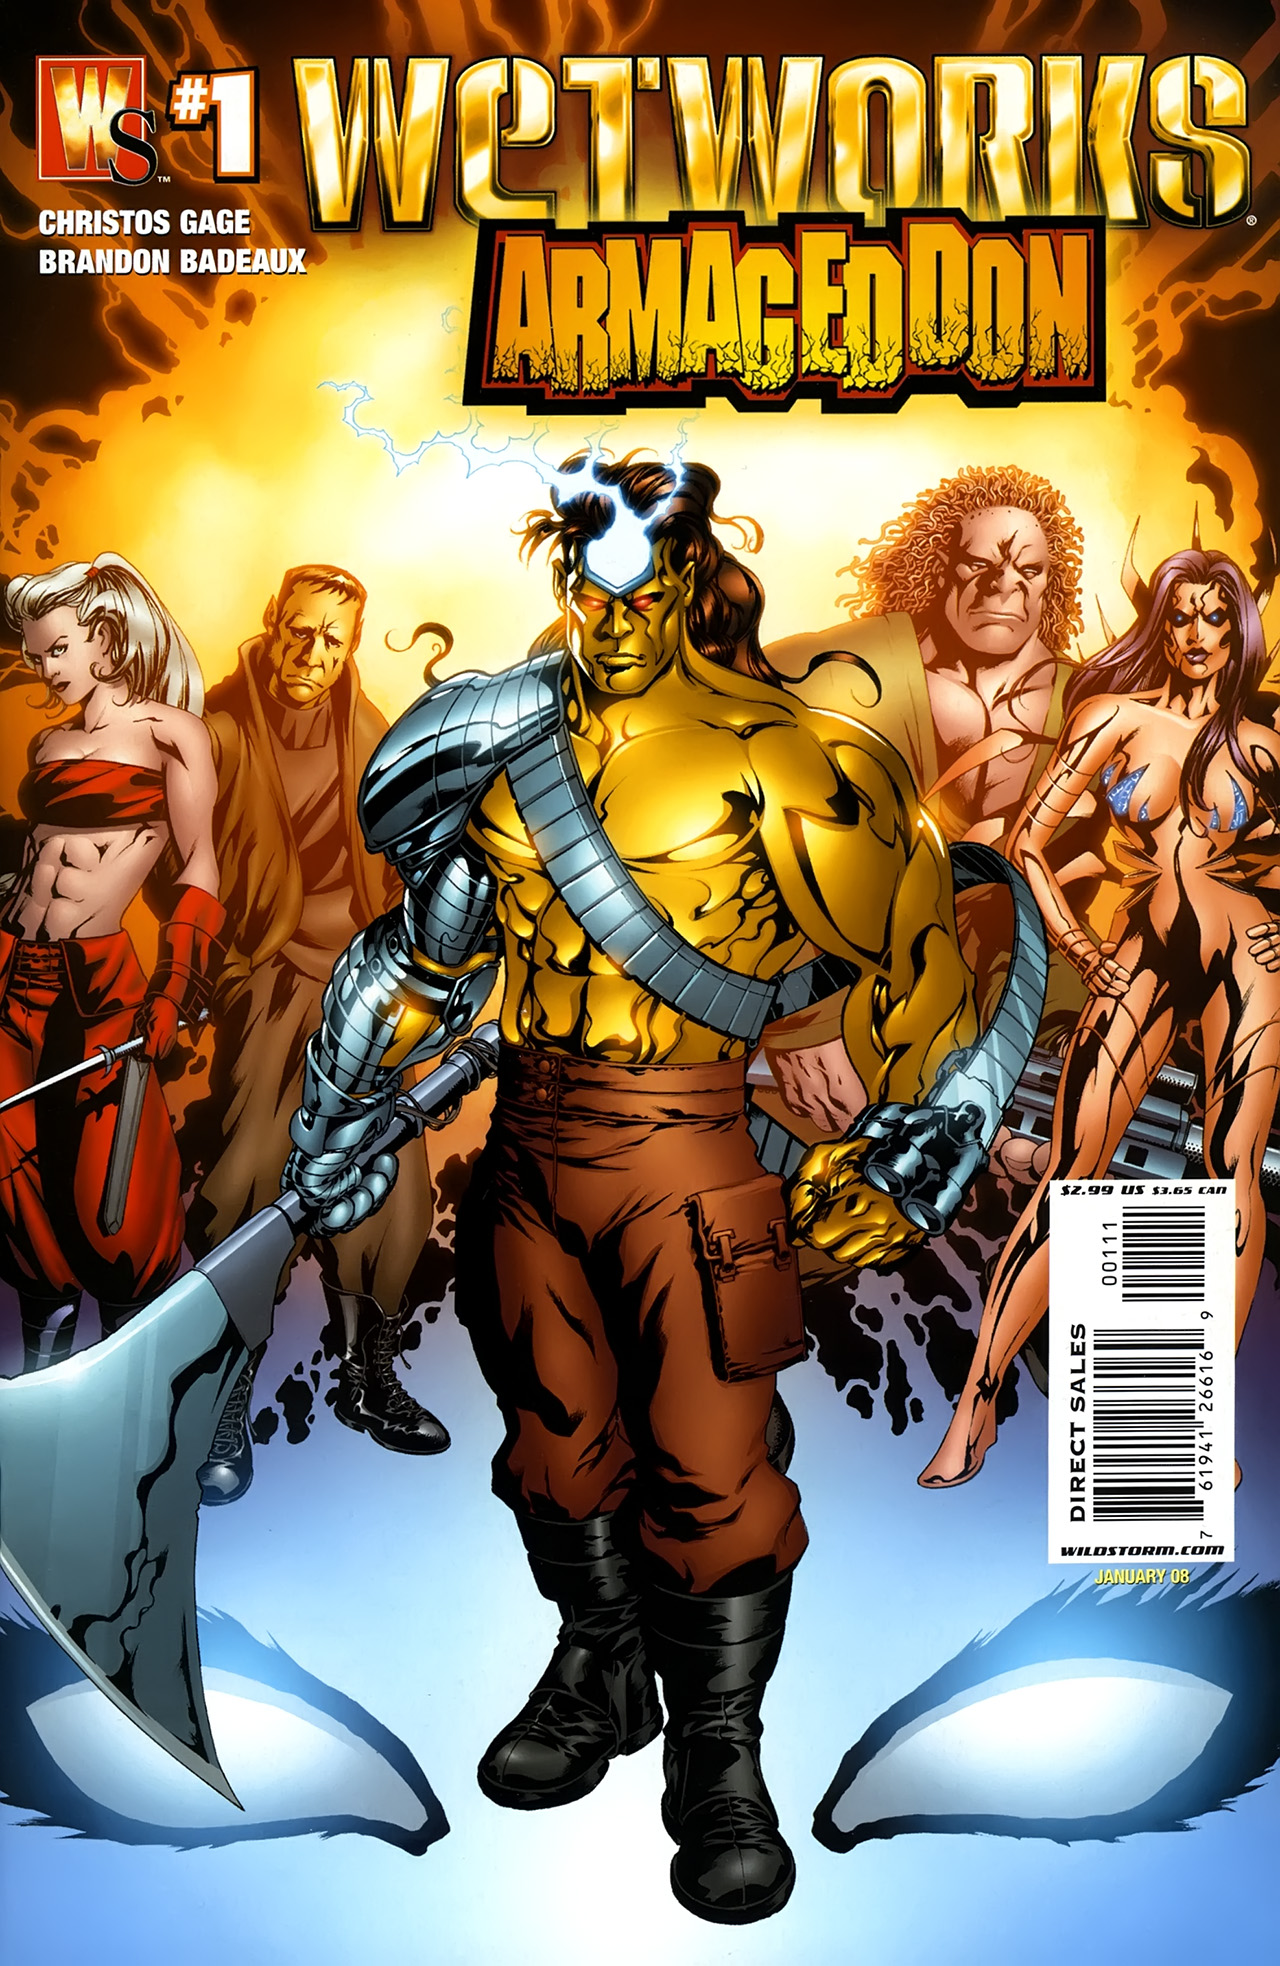 Read online Wetworks: Armageddon comic -  Issue # Full - 1